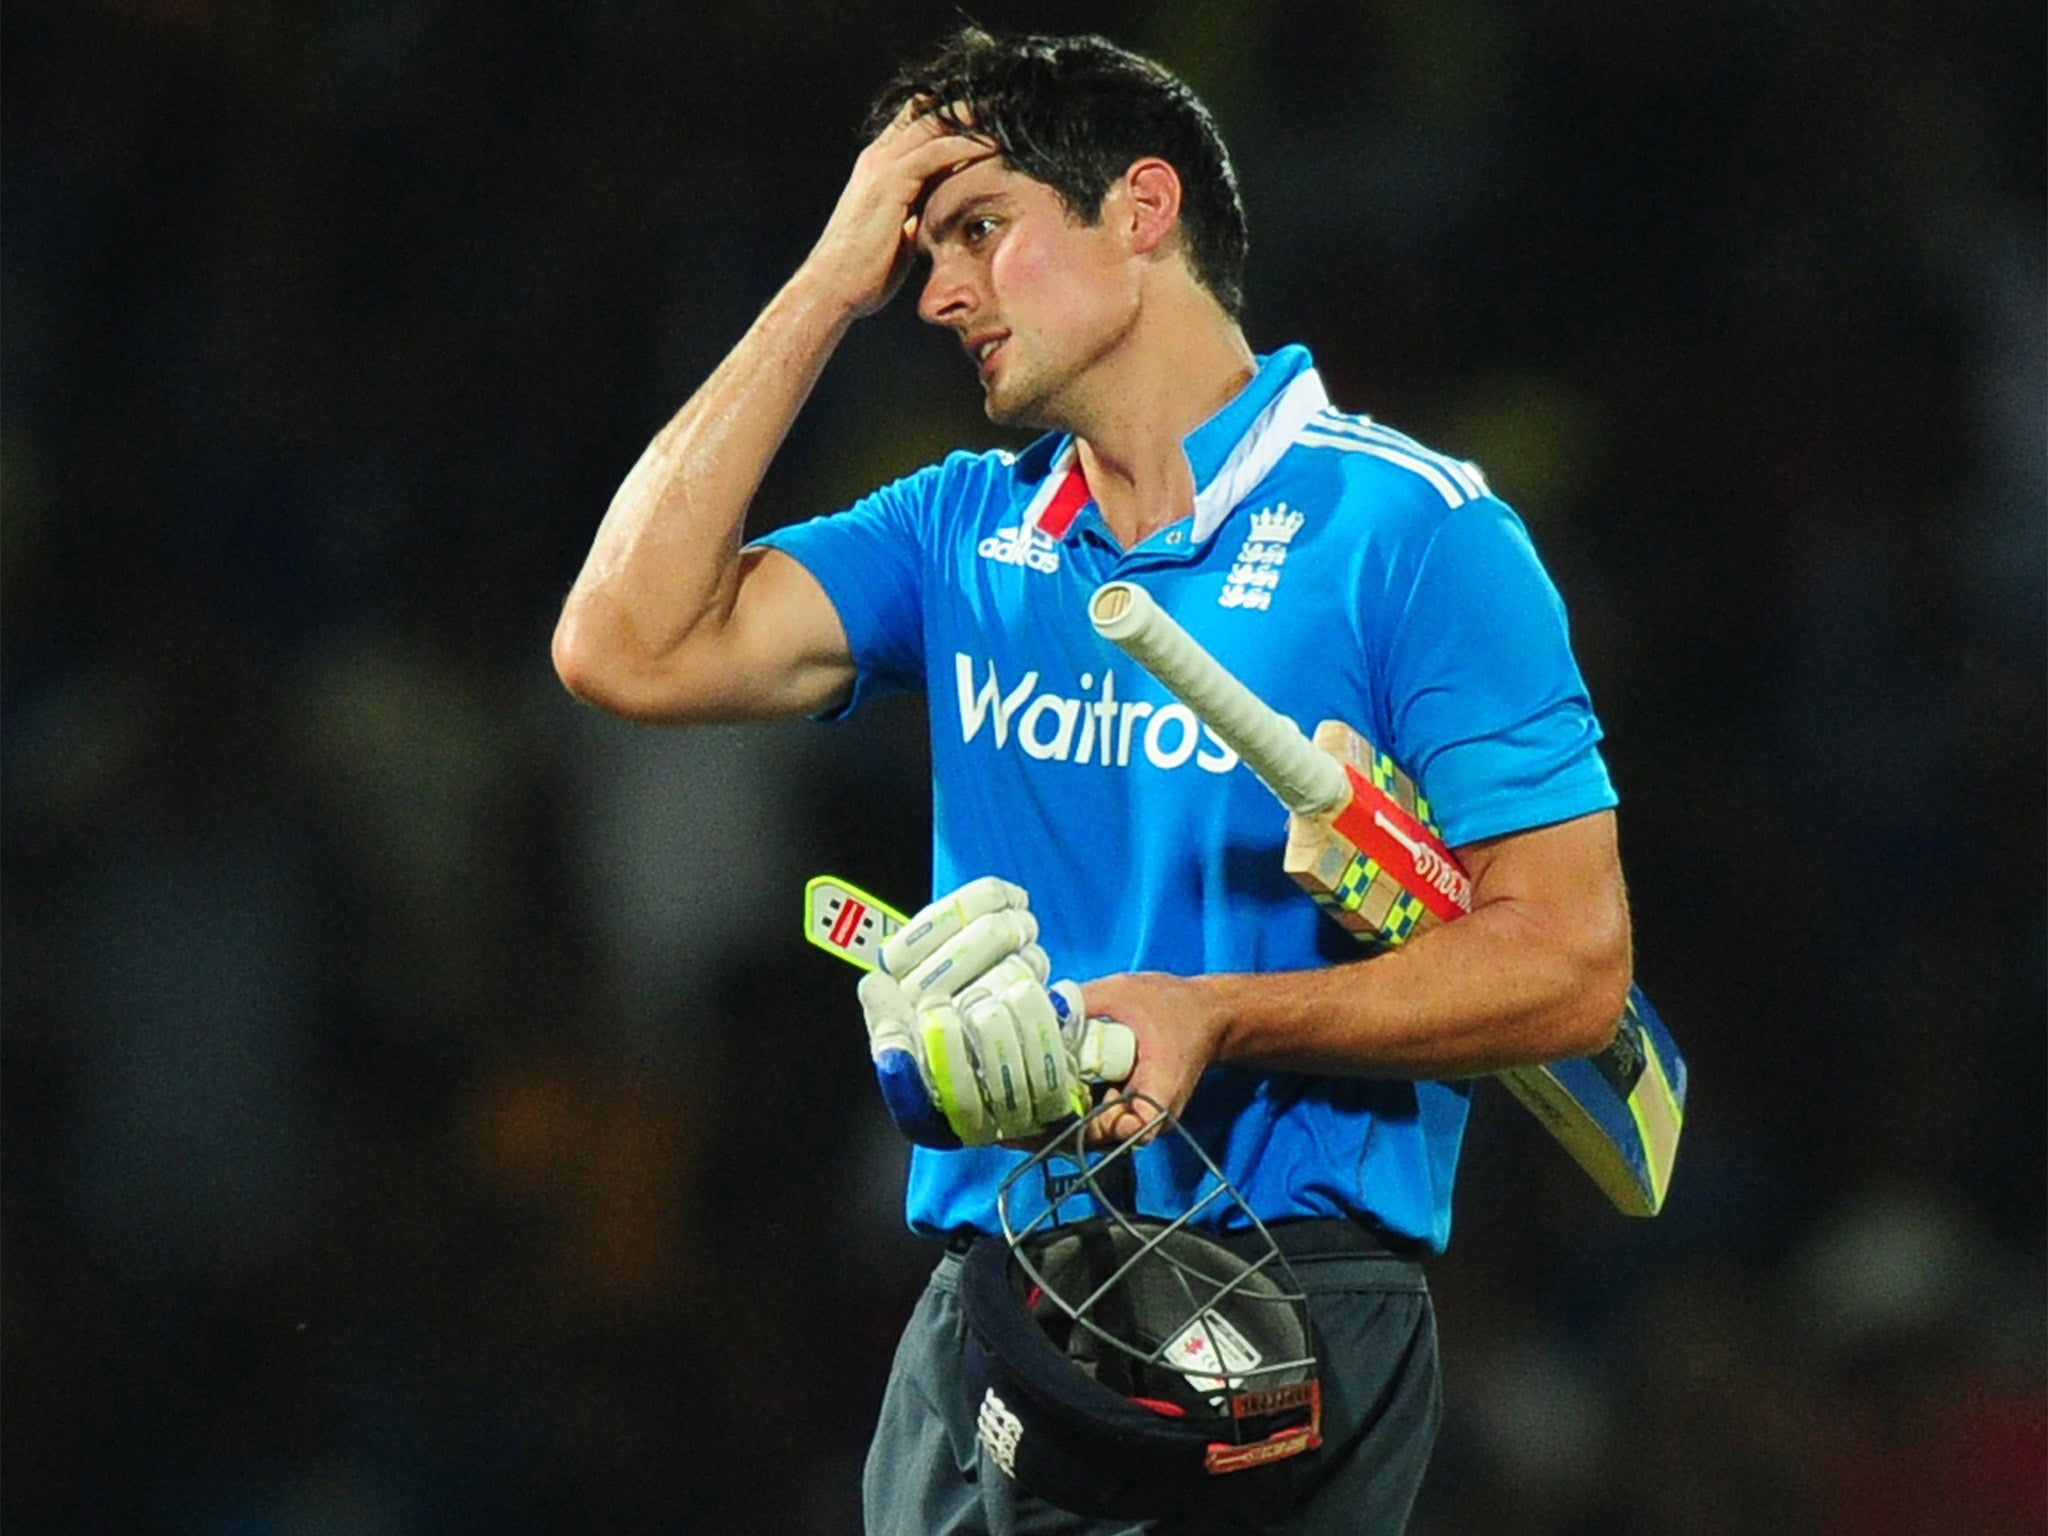 Alastair Cook’s sacking as England one-day captain ‘was the correct decision but too late’